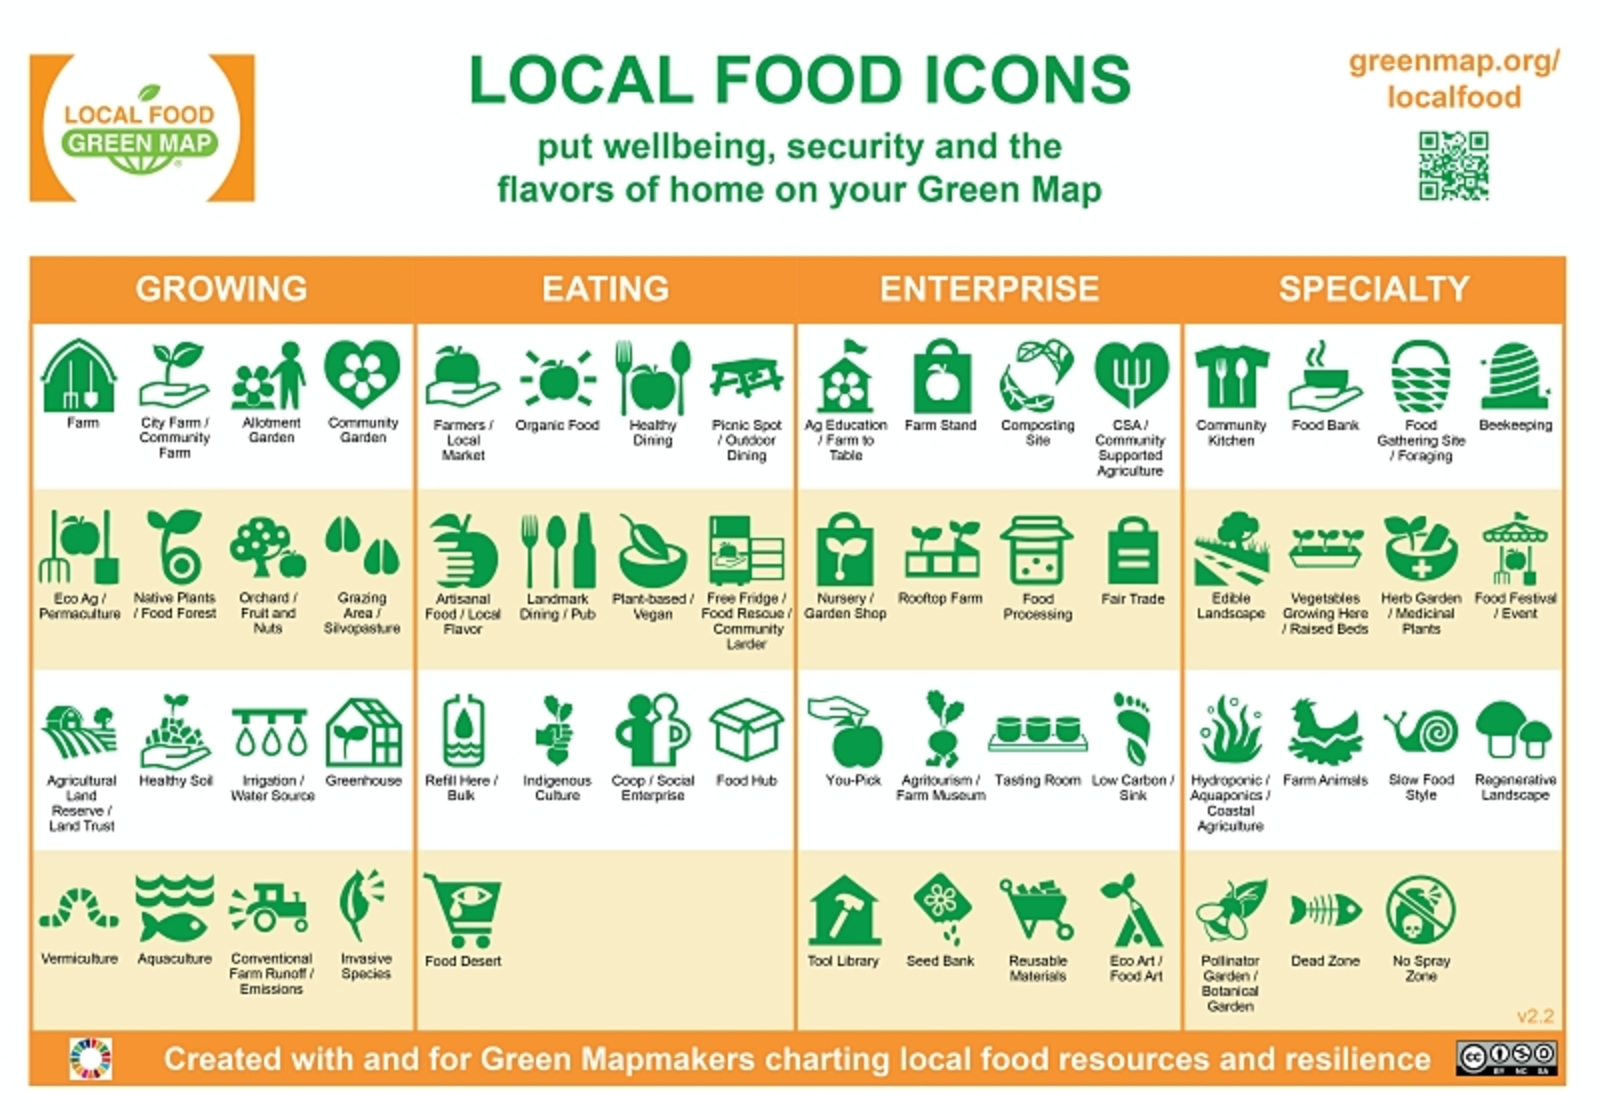 Our new local food icons engage youth, rural and frontline communities